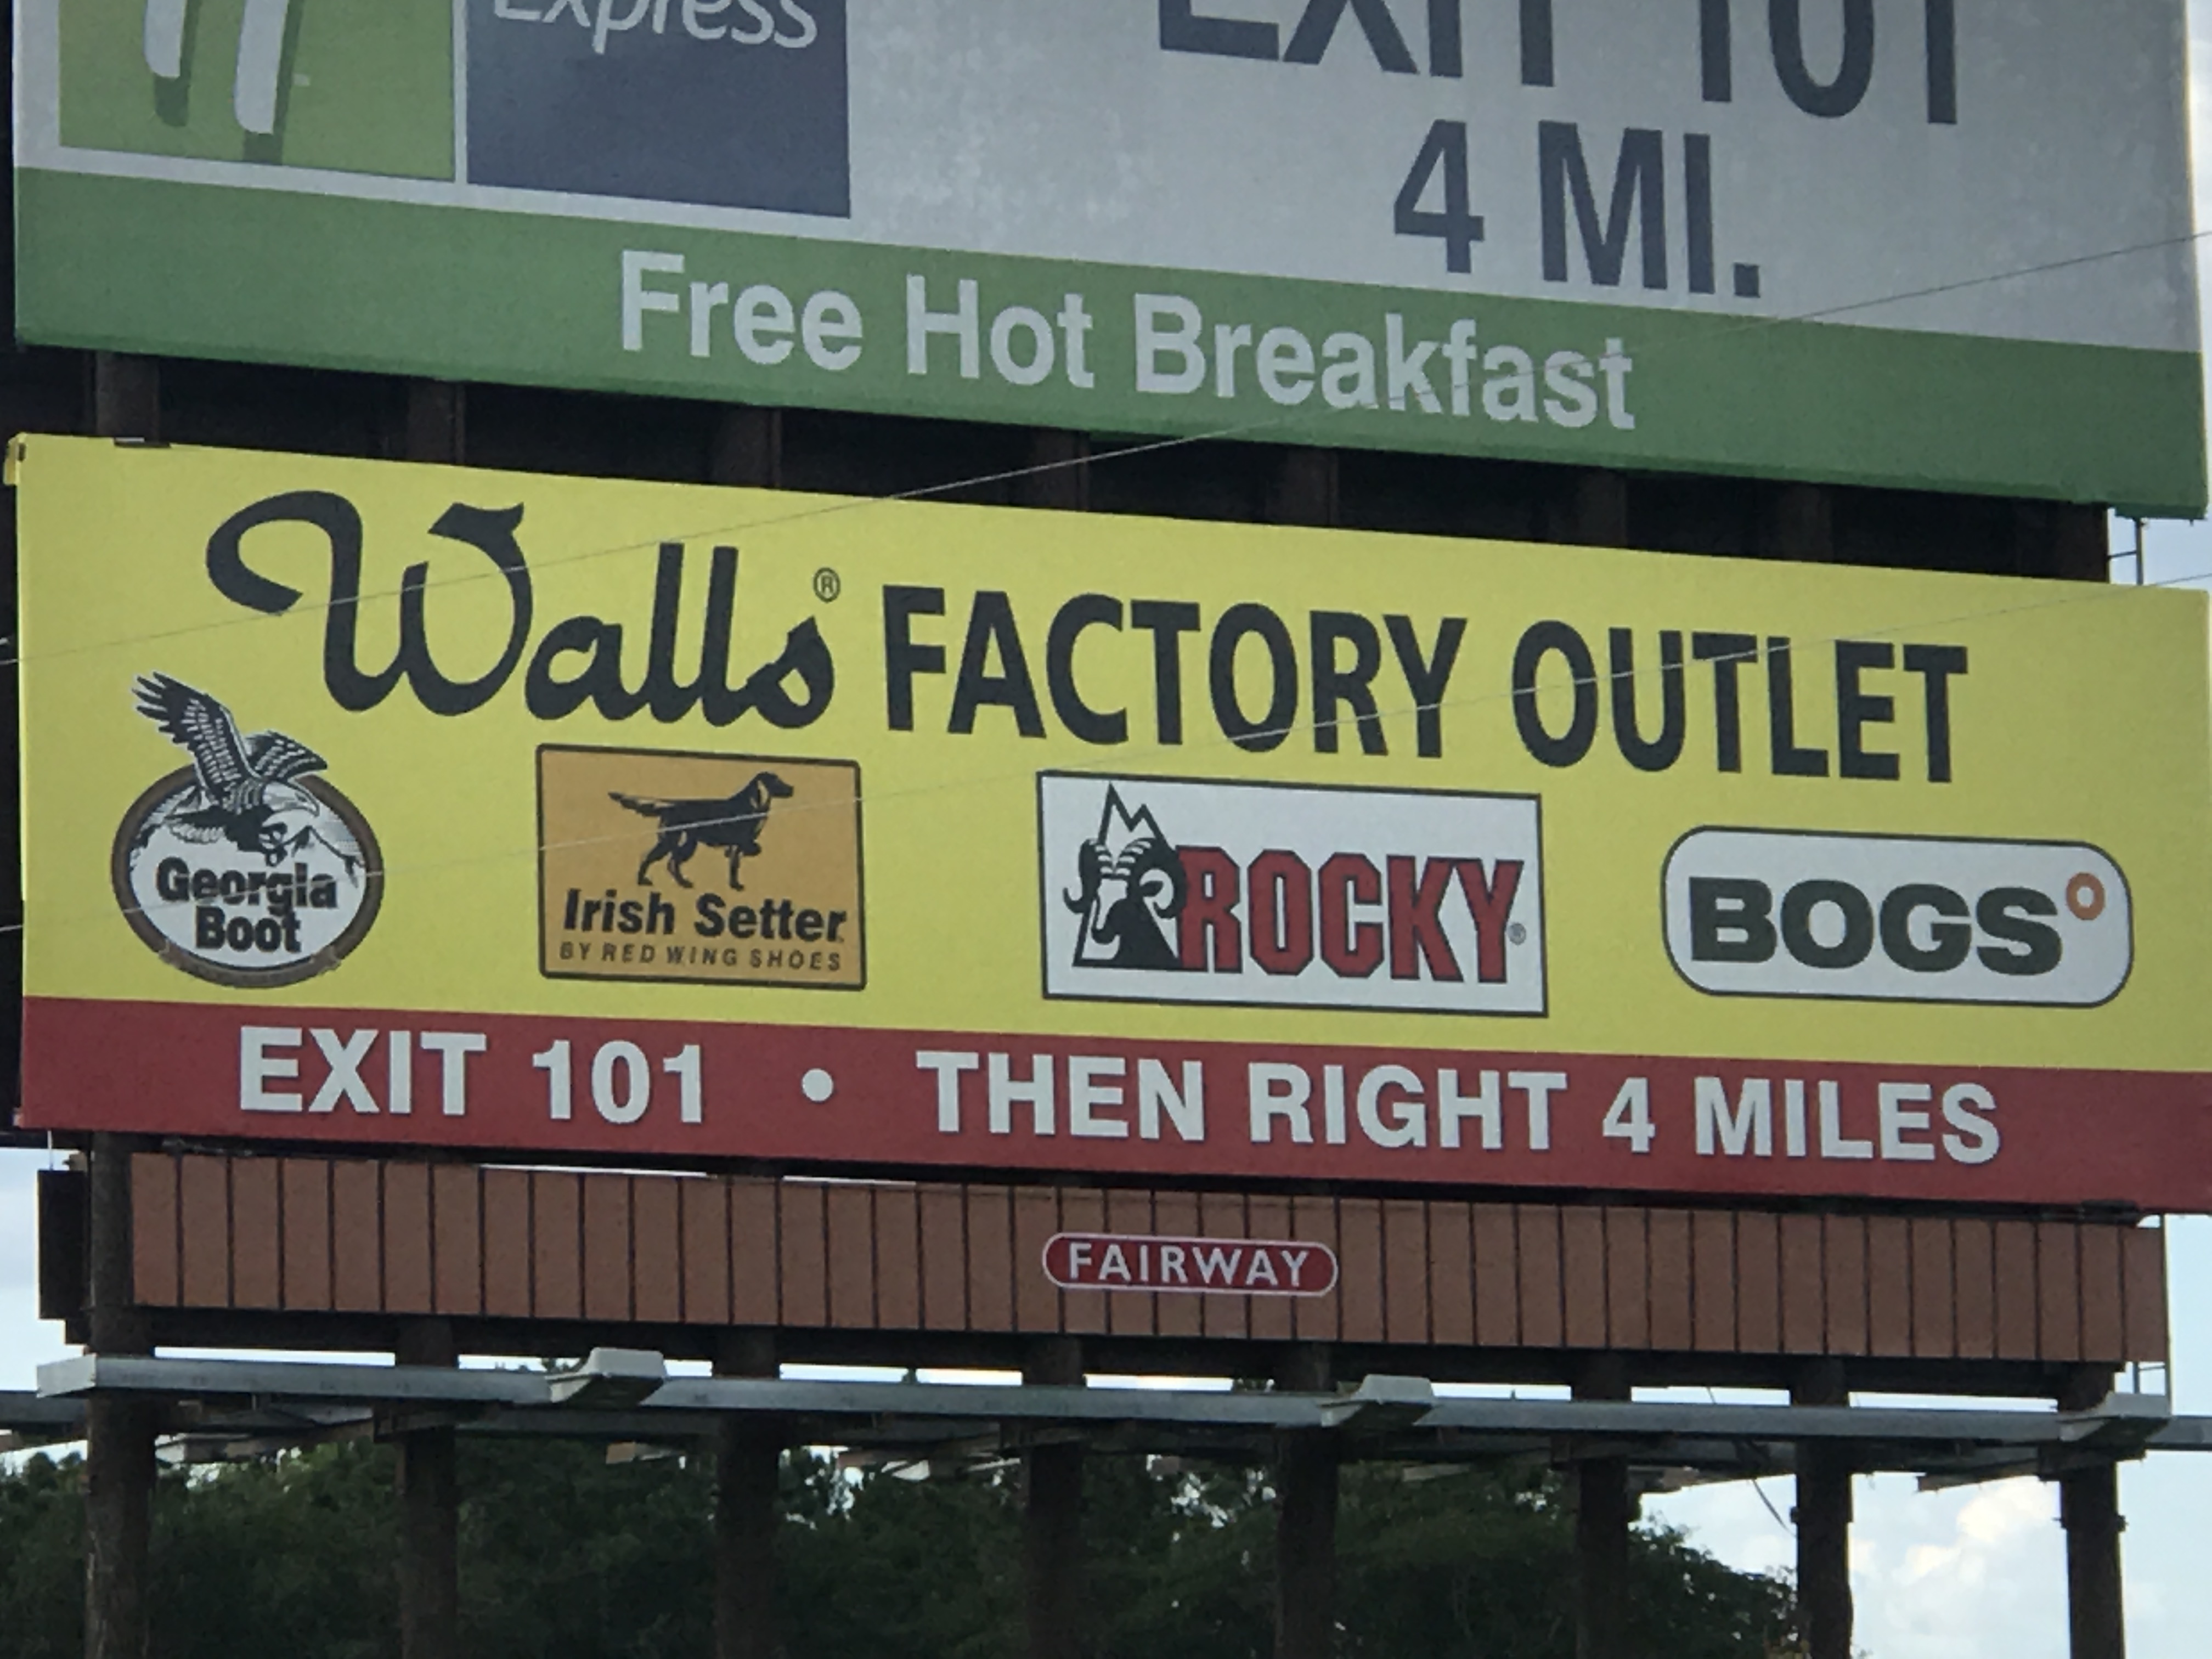 georgia boot outlet store